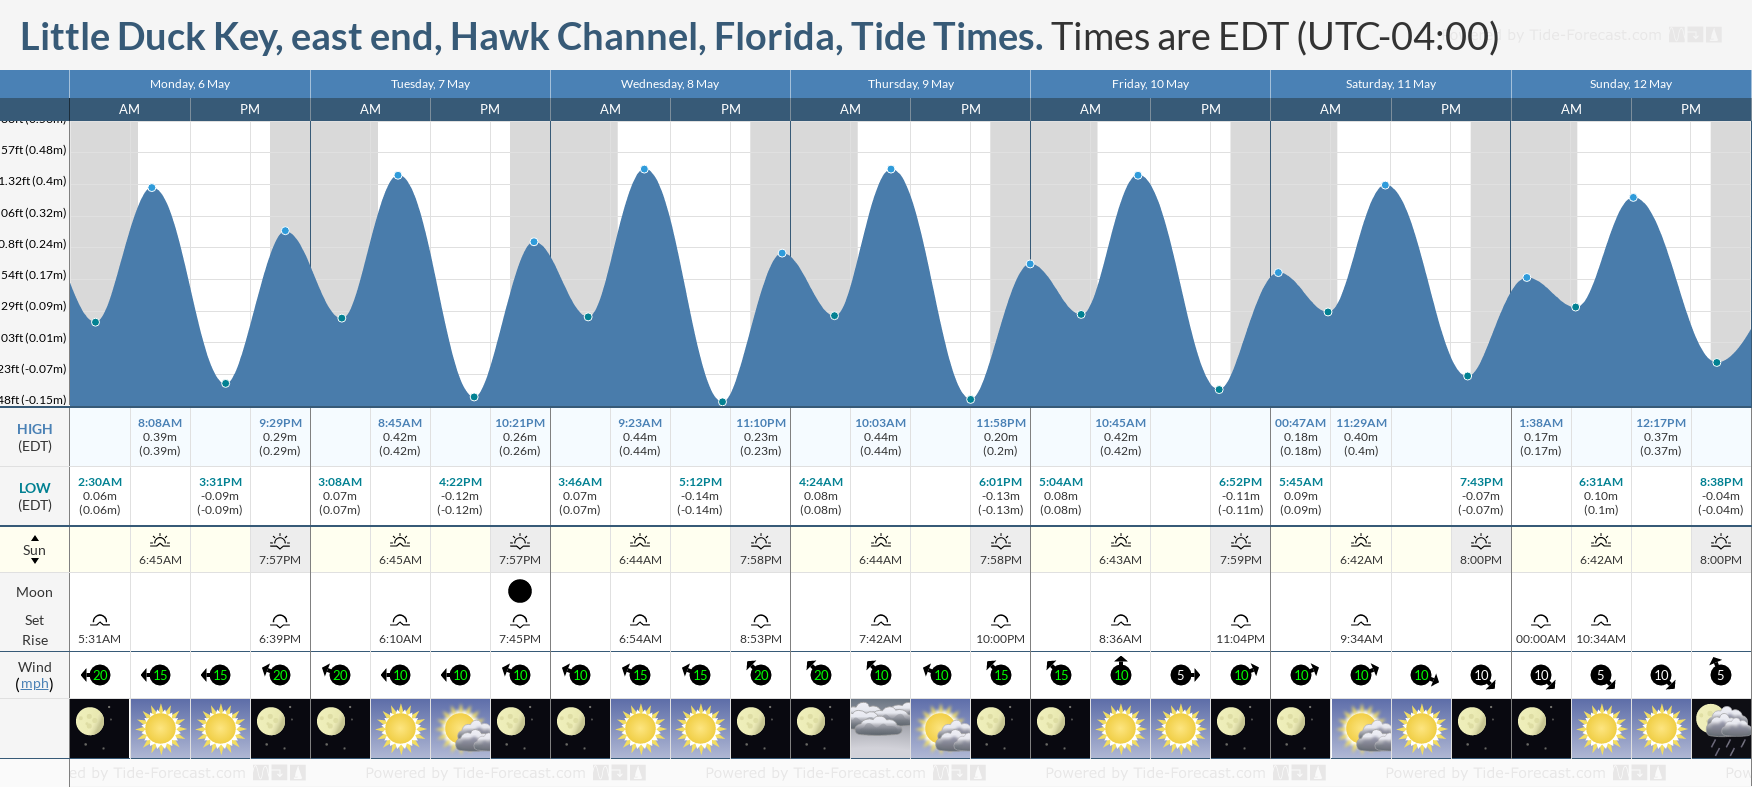 Little Duck Key, east end, Hawk Channel, Florida Tide Chart including high and low tide times for the next 7 days